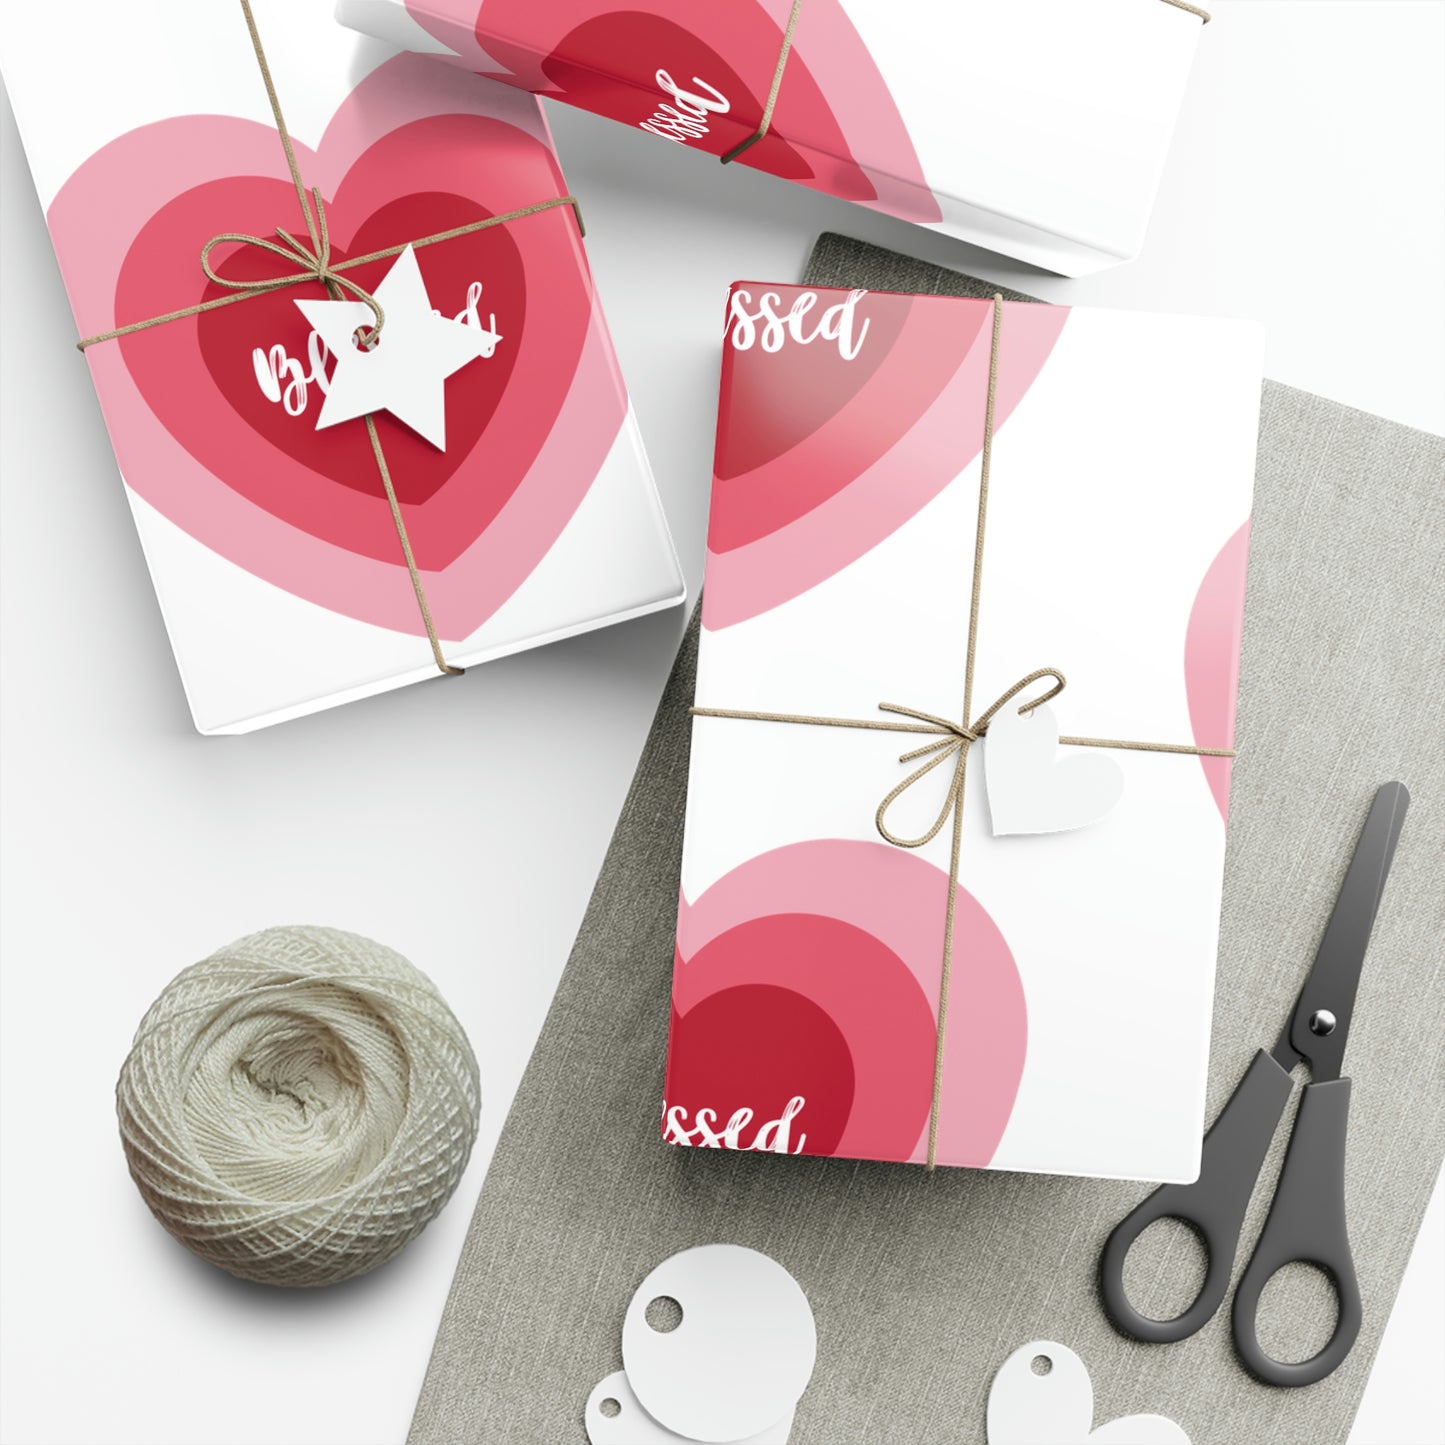 Blessed Heart Gift Wrap